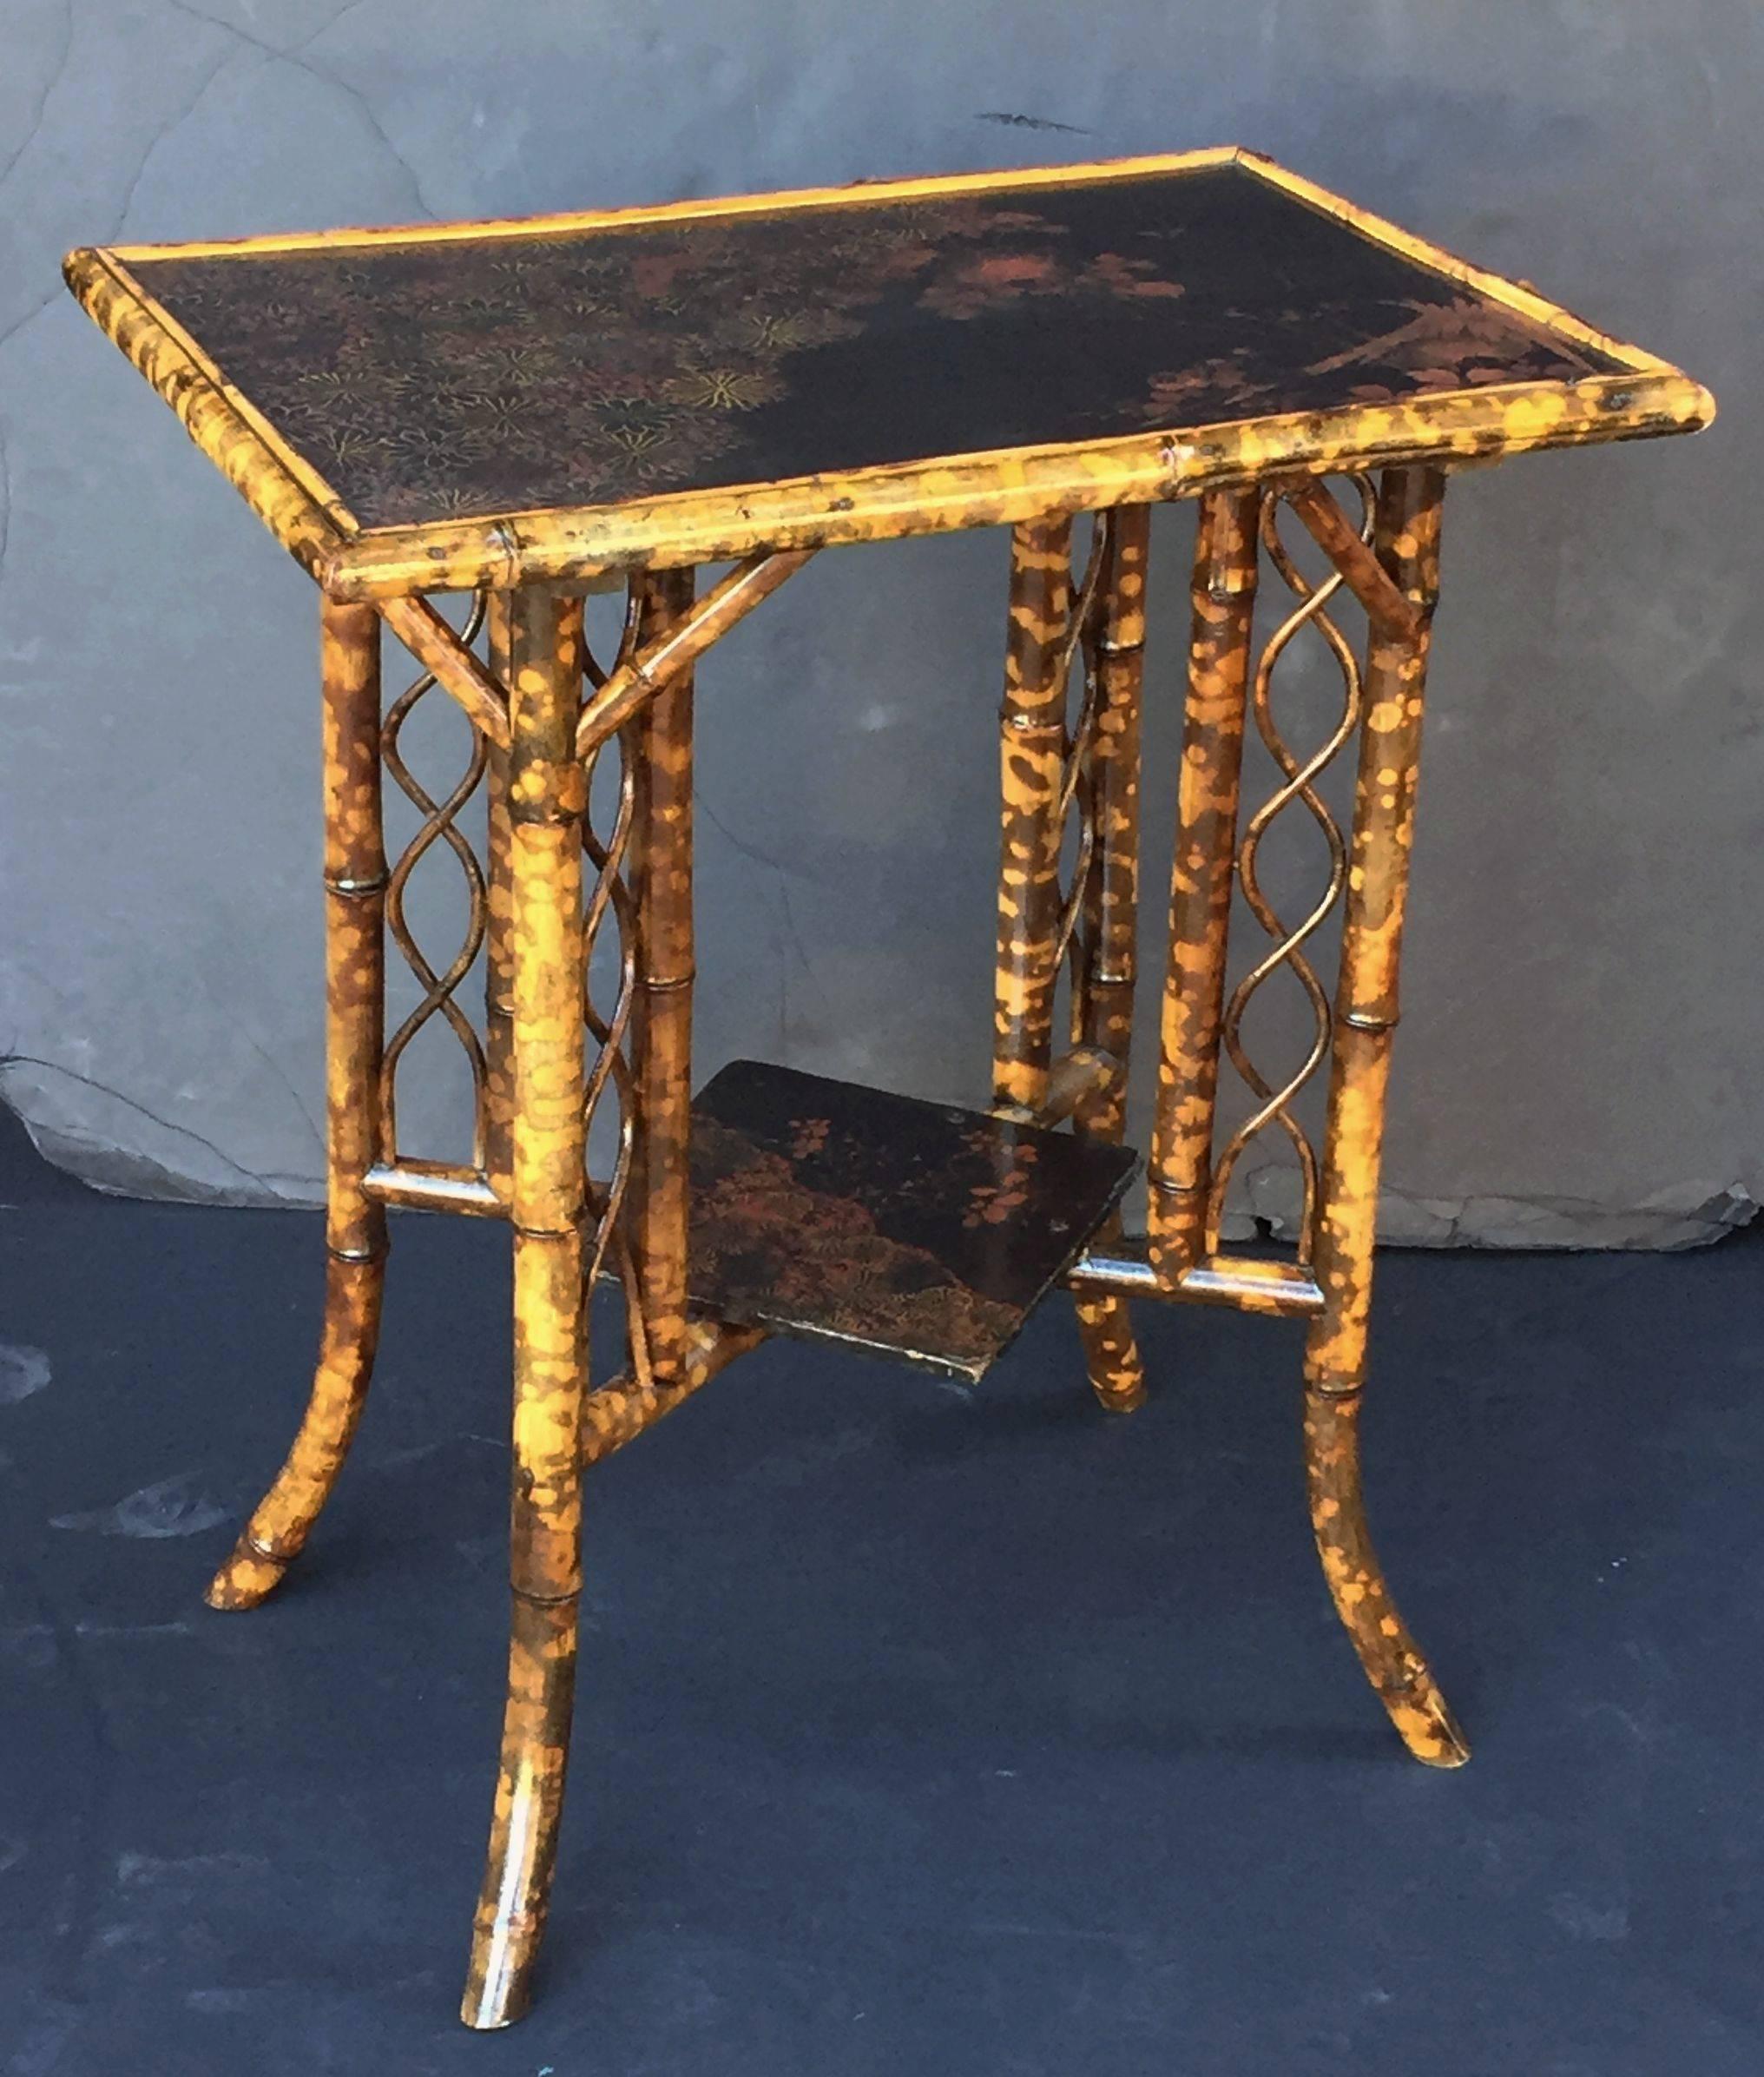 A fine English bamboo table featuring a rectangular top with Japan lacquered Chinoiserie design, over a stretcher base with square lacquered panel and ornamental serpentine fretwork running vertically at each corner.